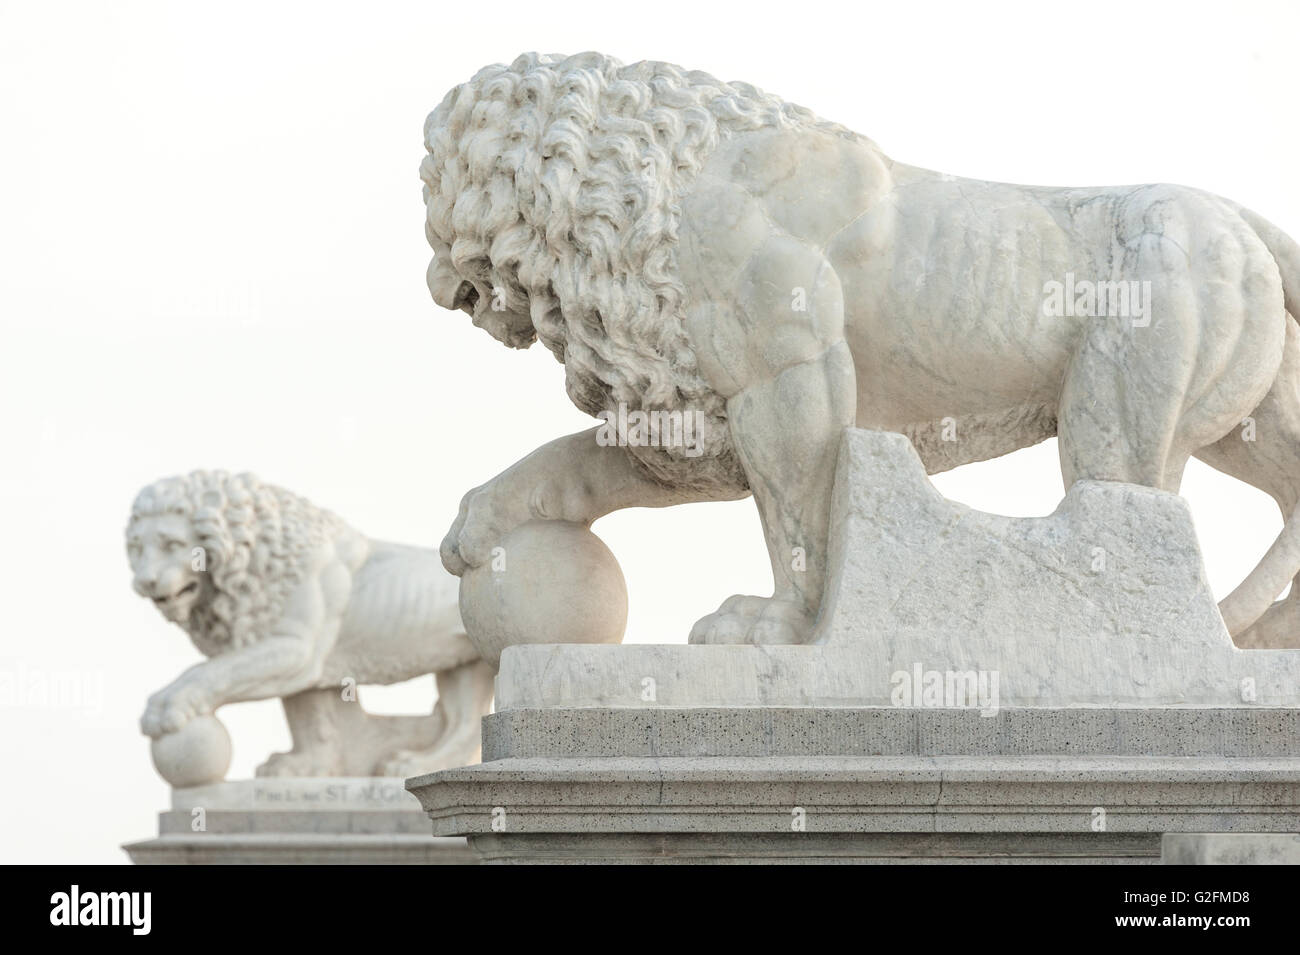 St. Augustine, Florida's Bridge of Lions features two white Carrara marble Medici lions at the foot of the bridge on A1A. Stock Photo